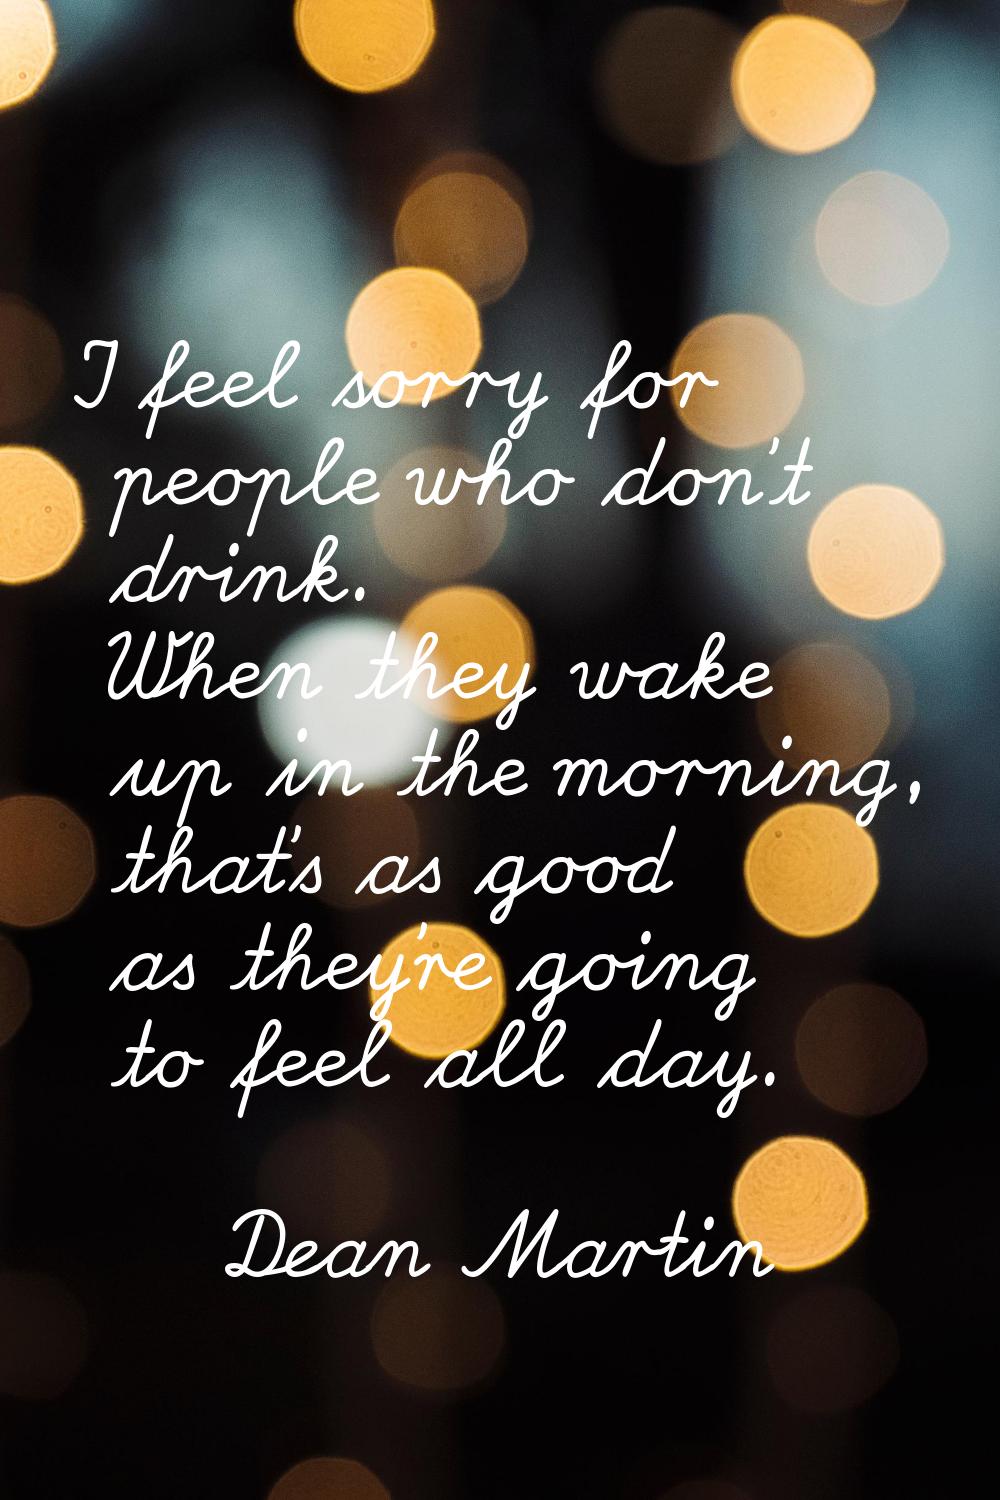 I feel sorry for people who don't drink. When they wake up in the morning, that's as good as they'r